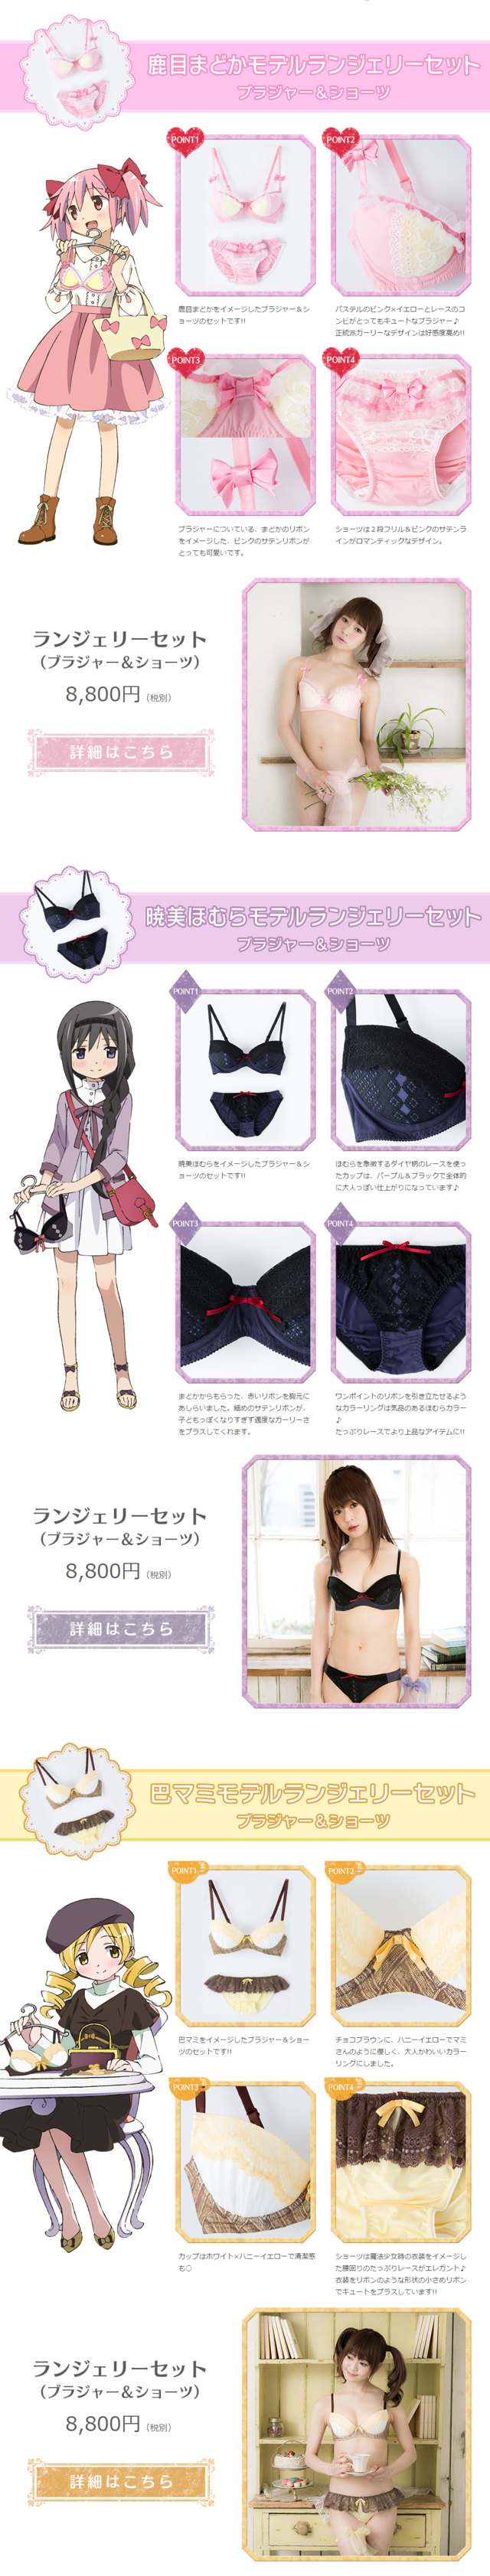 Supergroupies Lets You Be a Magical Girl on the inside with Madoka Lingerie5